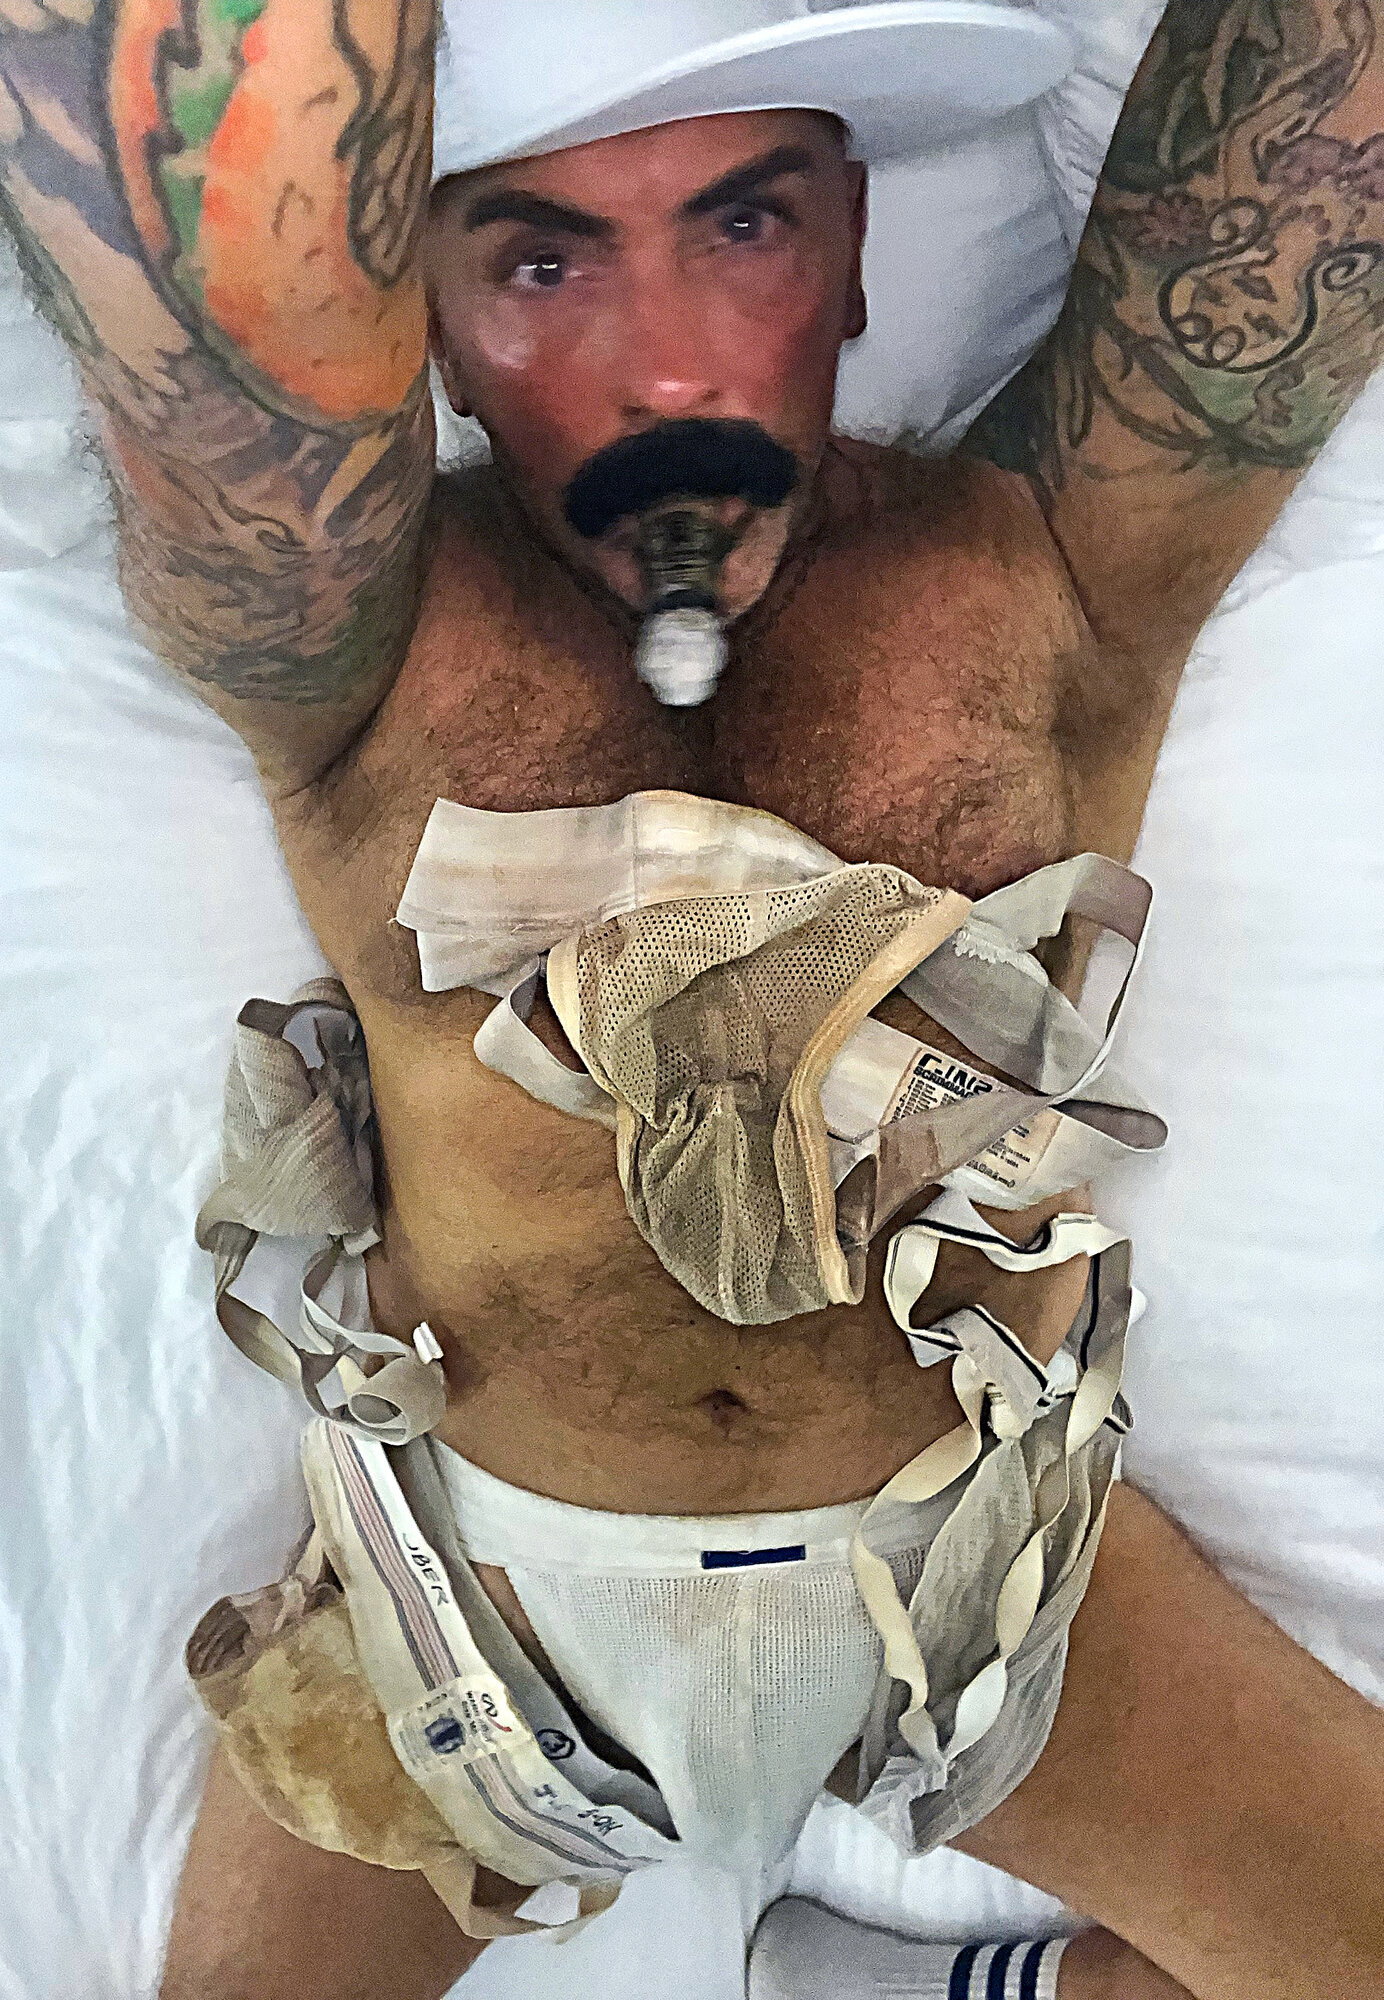 STINKYDONGER LAYING IN A PILE OF DIRTY, USED, SWAPPED CUM RAG JOCKS